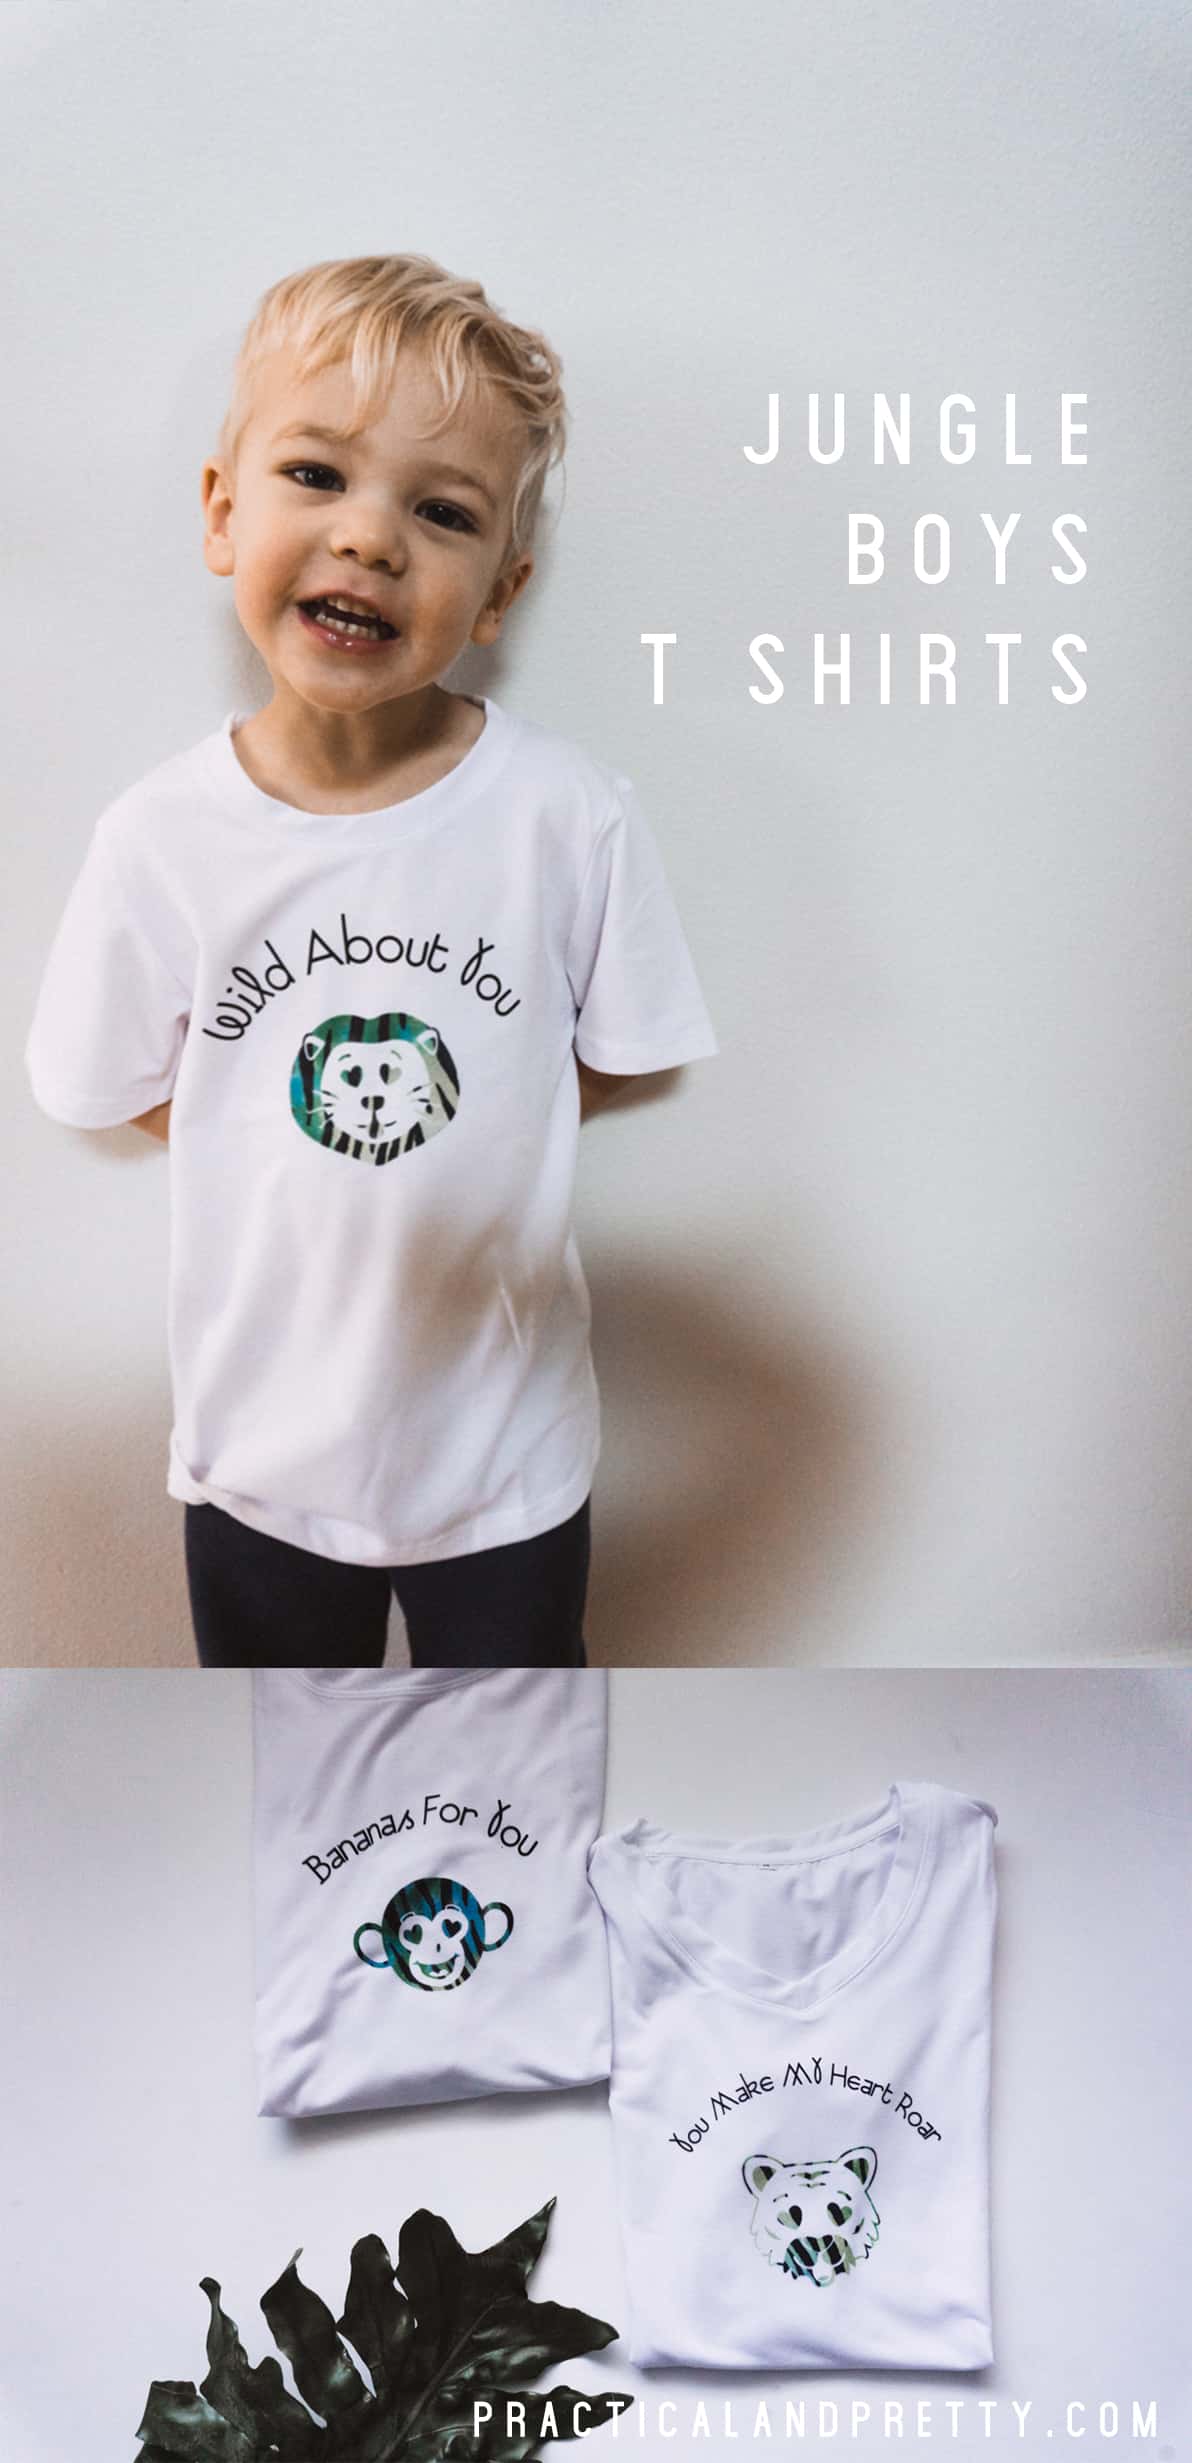 These boys t shirts are perfect for your favorite little jungle lover. I have three designs for you to choose from sure to fit the style of your little one.